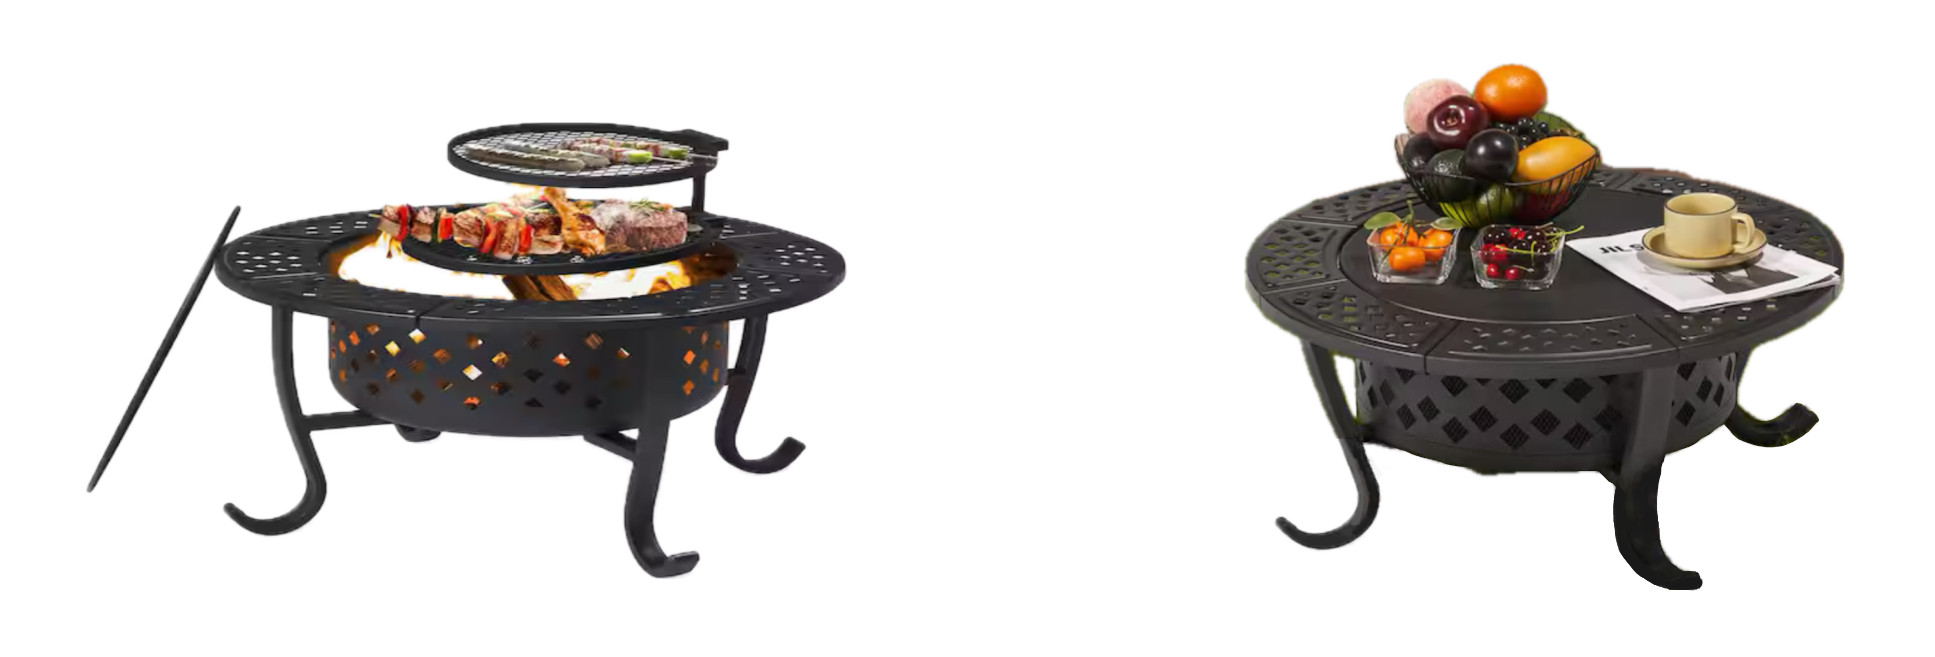 Outdoor Metal table for campfires